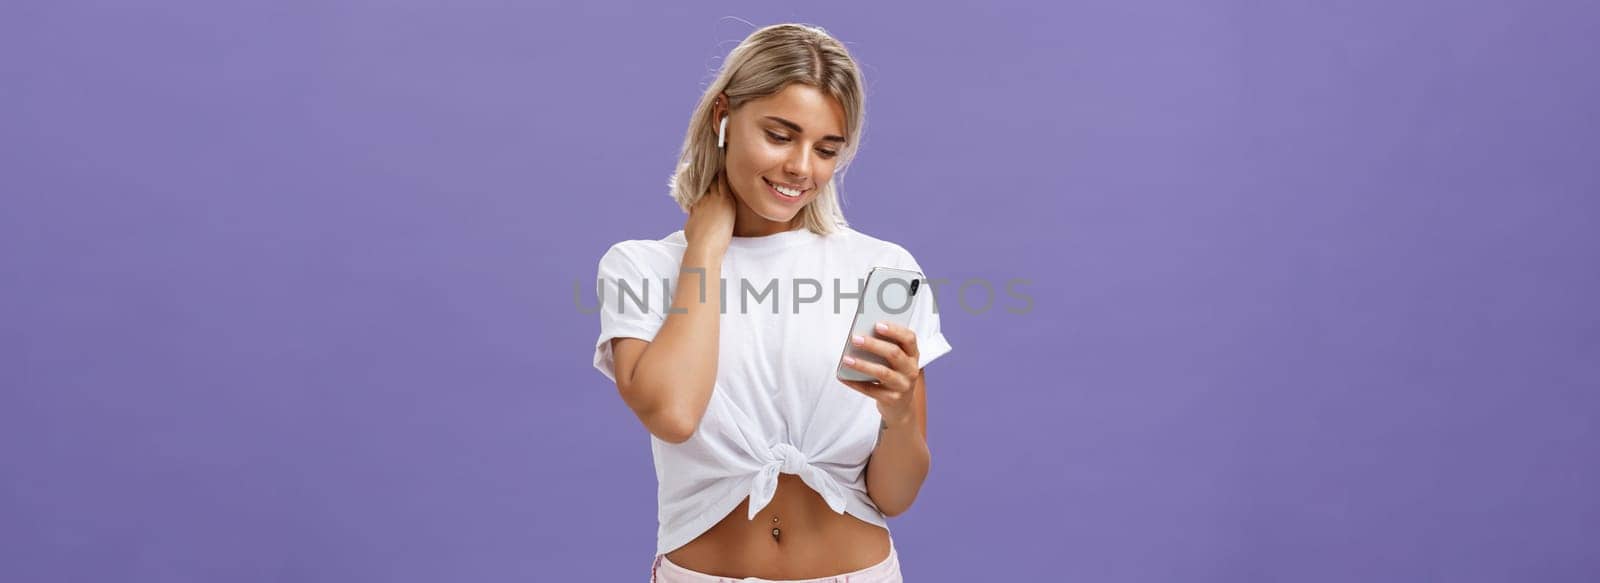 Woman receiving warm romantic message being delighted and touched feeling love gazing at smartphone screen wearing wireless earphones touching neck gently being sensitive and feminine.